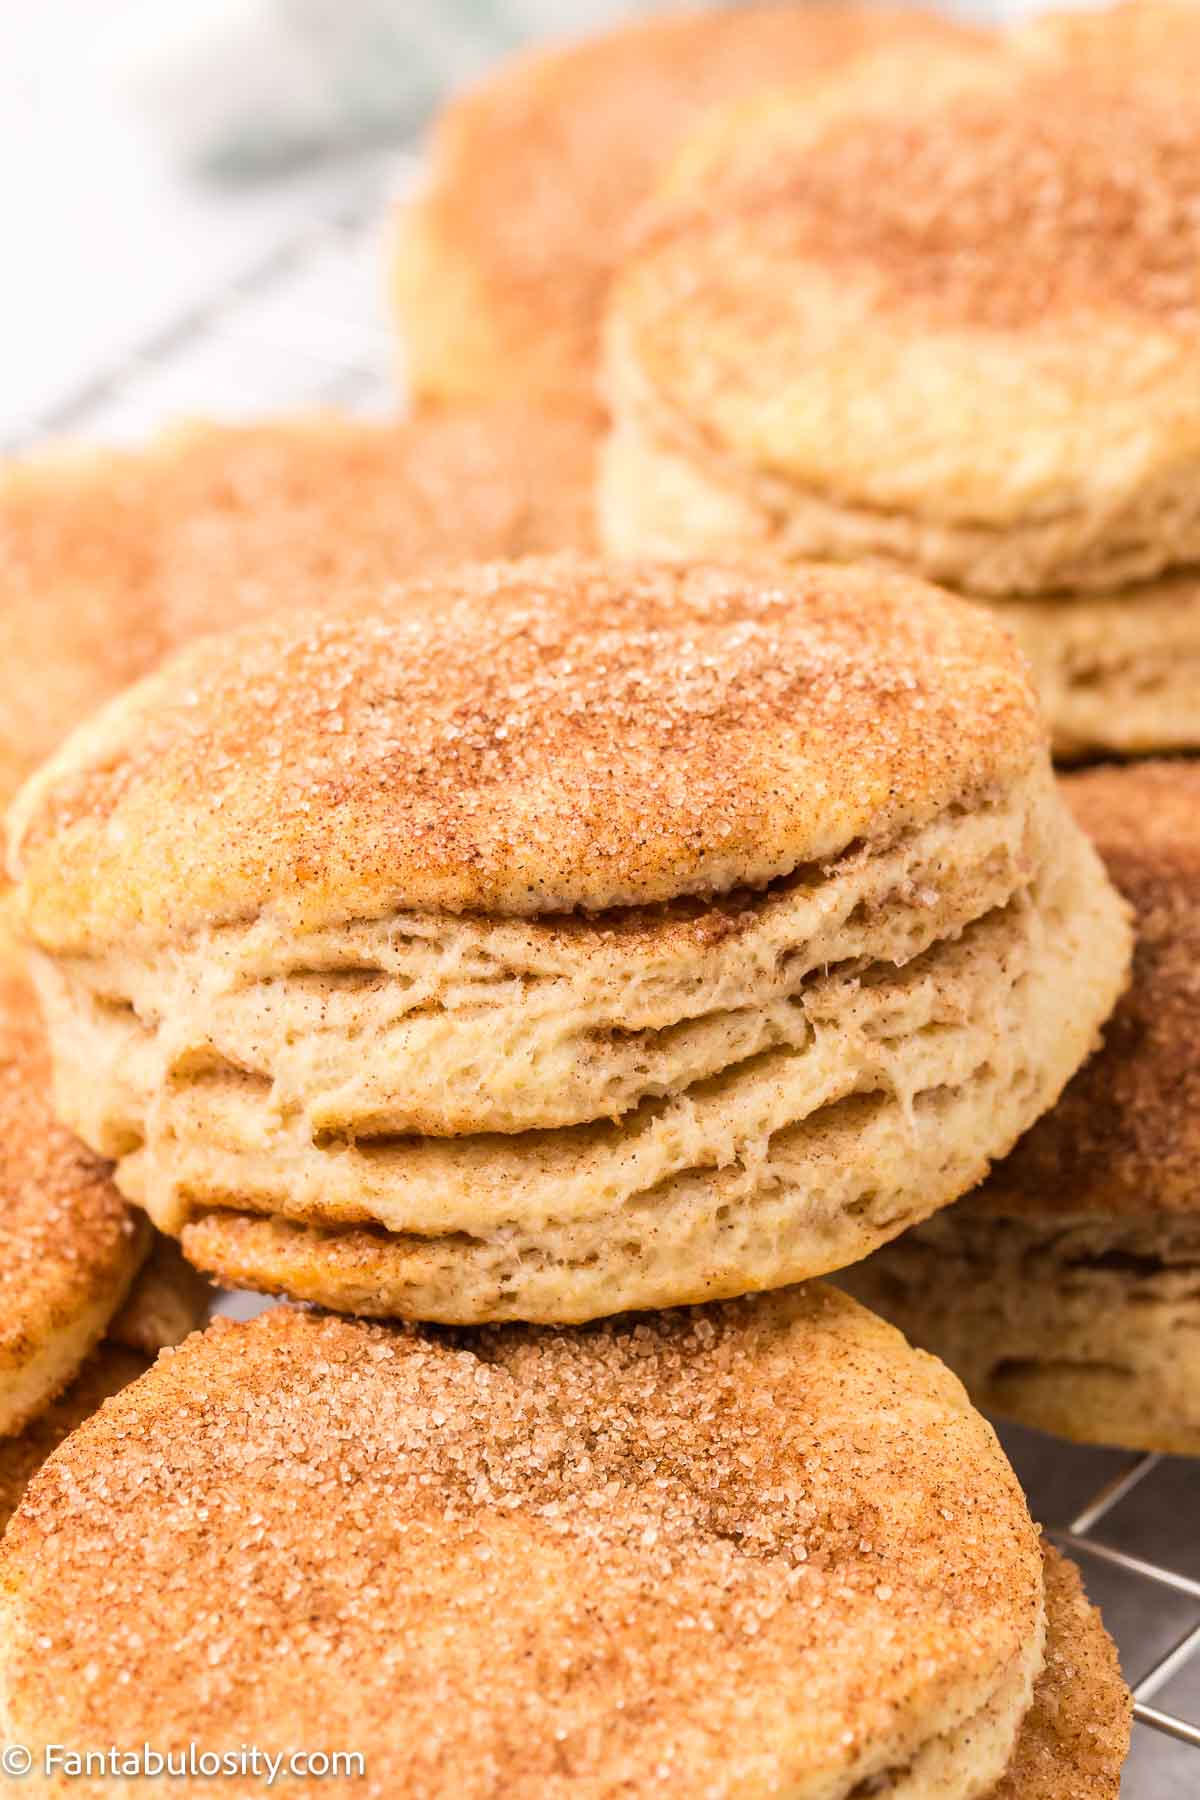 Baked cinnamon biscuits, stacked on top of each other.